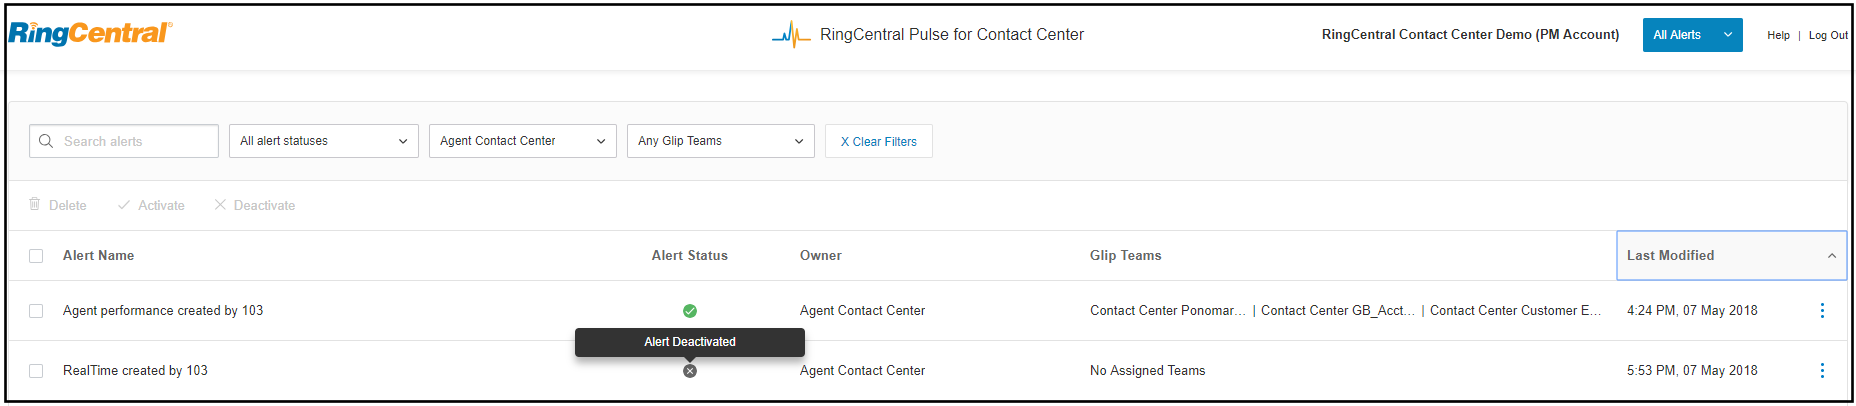 RingCentral Single Sign On | RingCentral SSO Integration